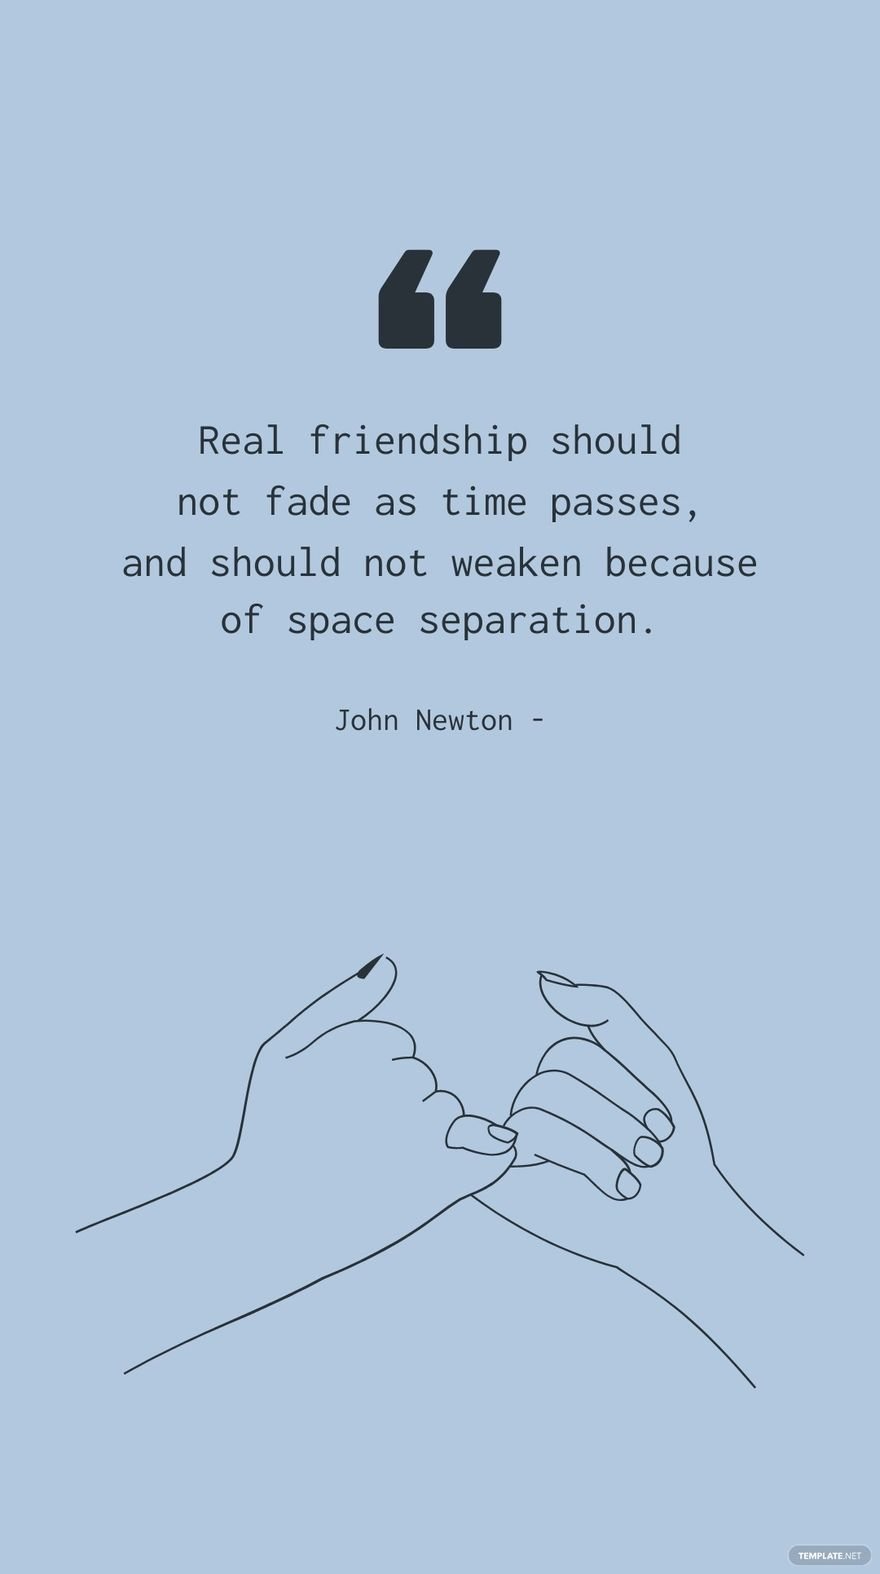 John Newton - Real friendship should not fade as time passes, and should not weaken because of space separation.